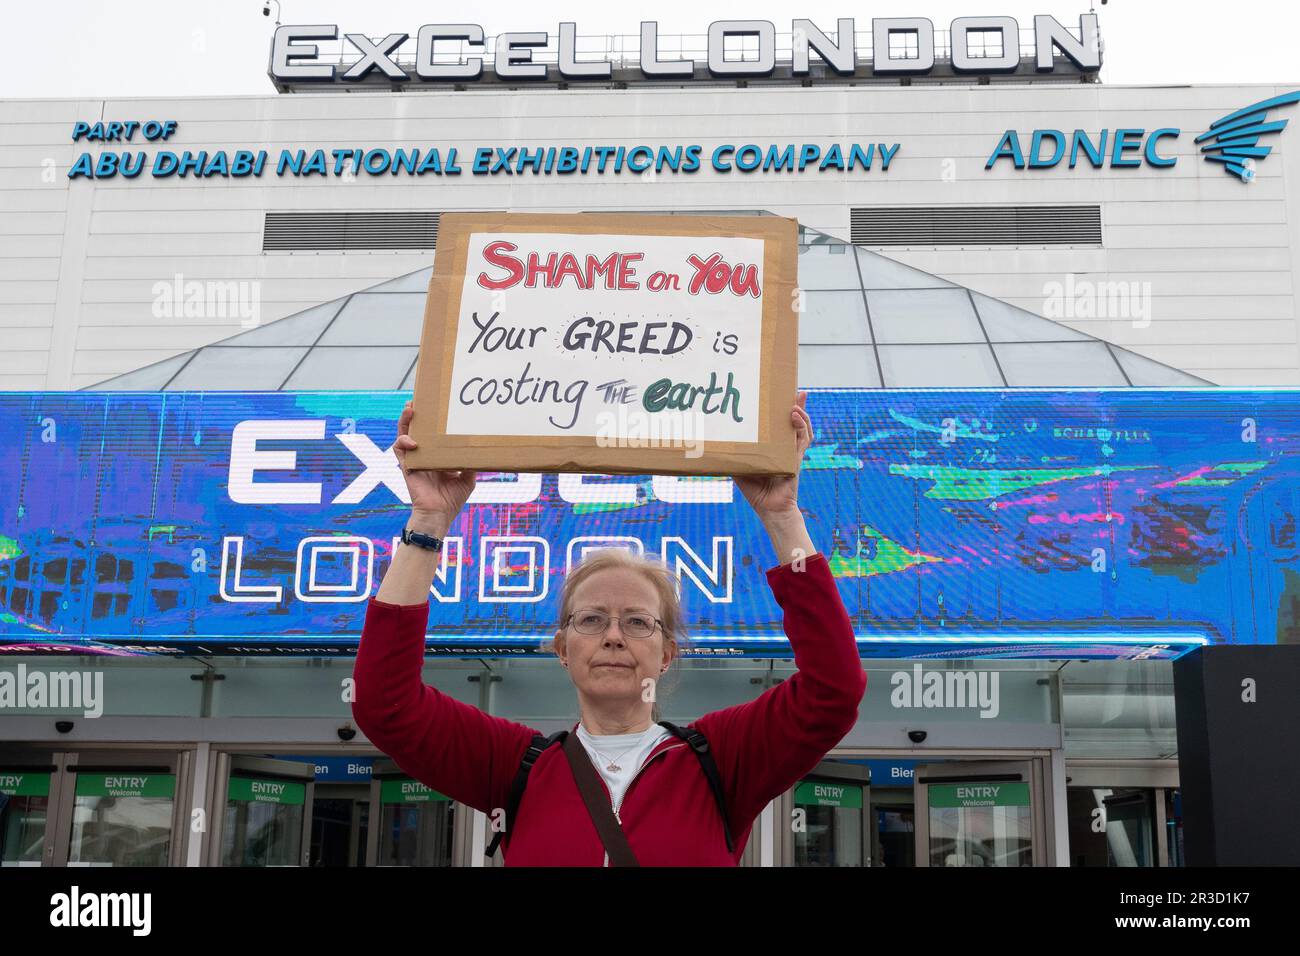 London, UK. 23 May, 2023. Climate activists protest outside the Annual General Meeting of oil giant Shell at the Excel Centre in docklands, calling on the company to drop plans to expand extraction of the fossil fuels responsible for global heating if we are to meet Paris climate targets on CO2 reduction and temperature increases. The company has enjoyed large profits while consumers faced record energy prices. Credit: Ron Fassbender/Alamy Live News Stock Photo